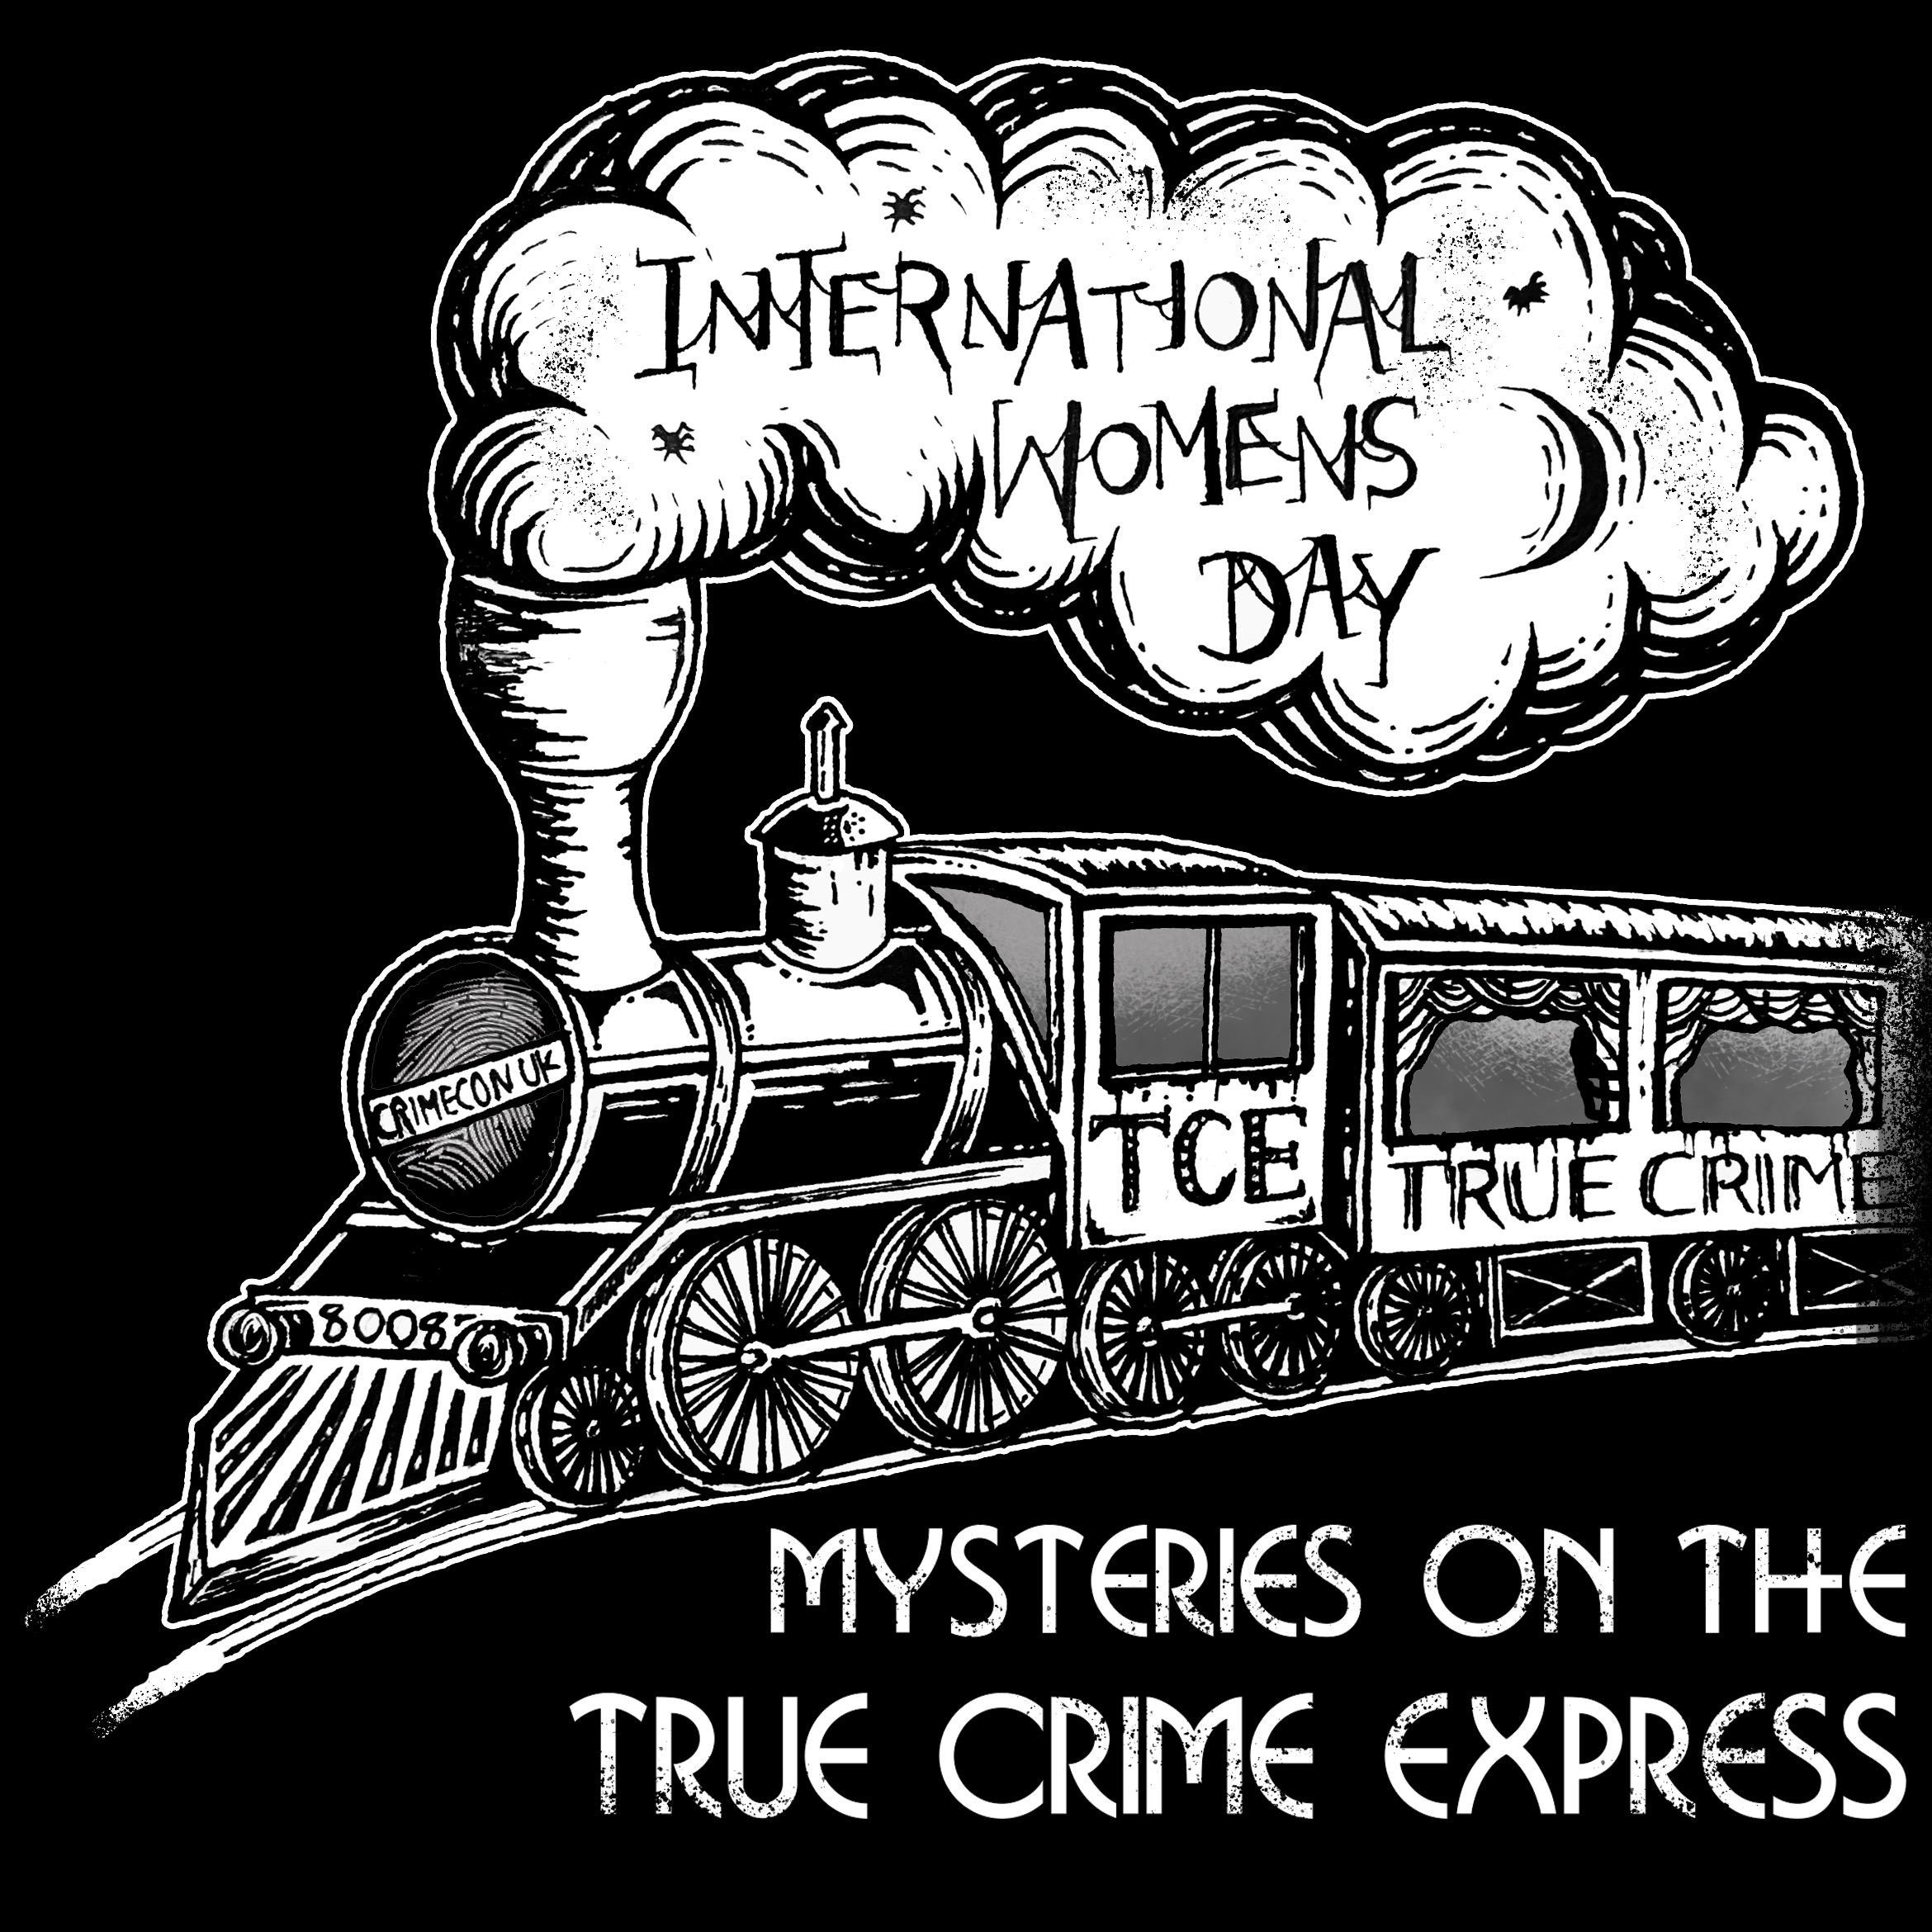 Mysteries on the True Crime Express